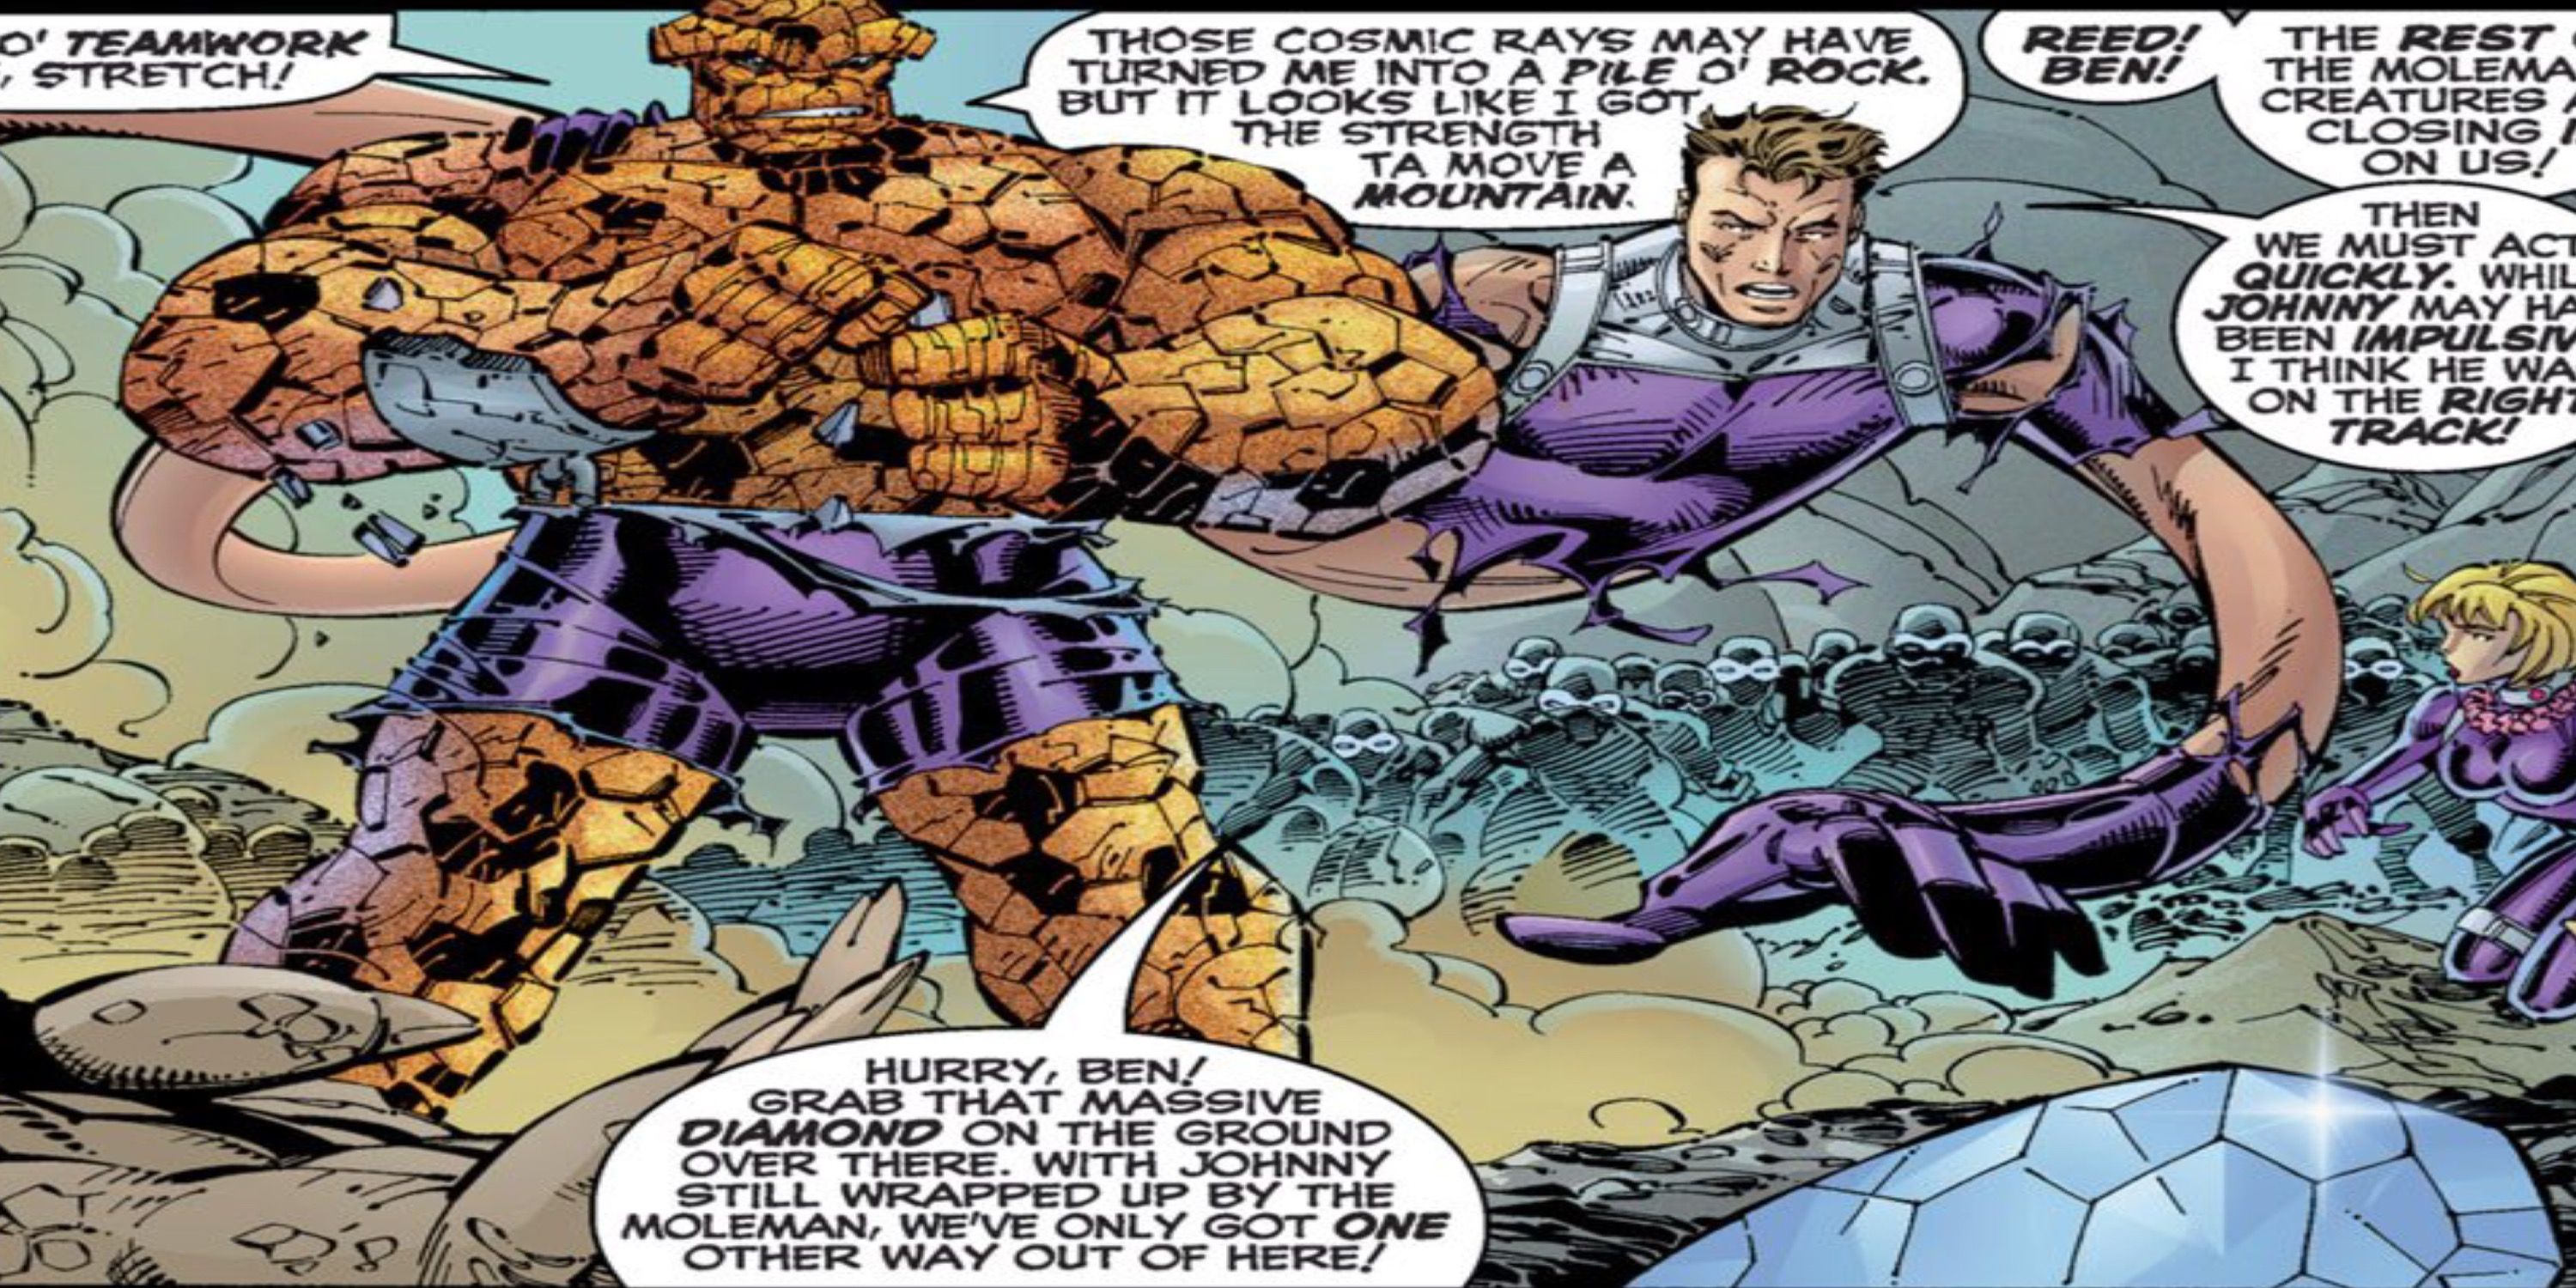 Reed Richards and Ben Grimm